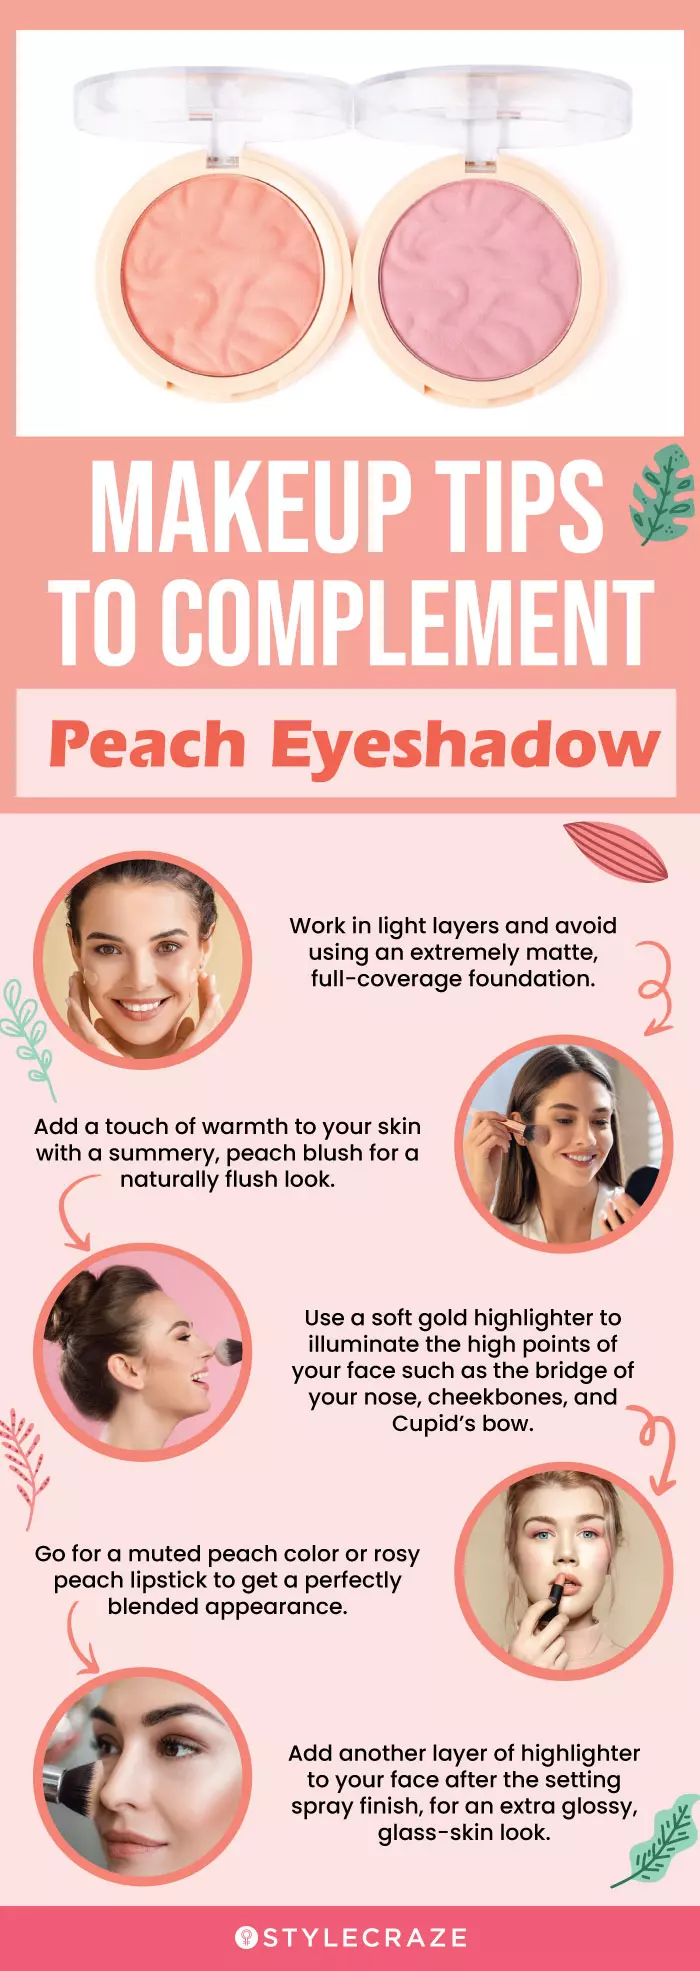 Makeup Tips To Complement Peach Eyeshadow (infographic)